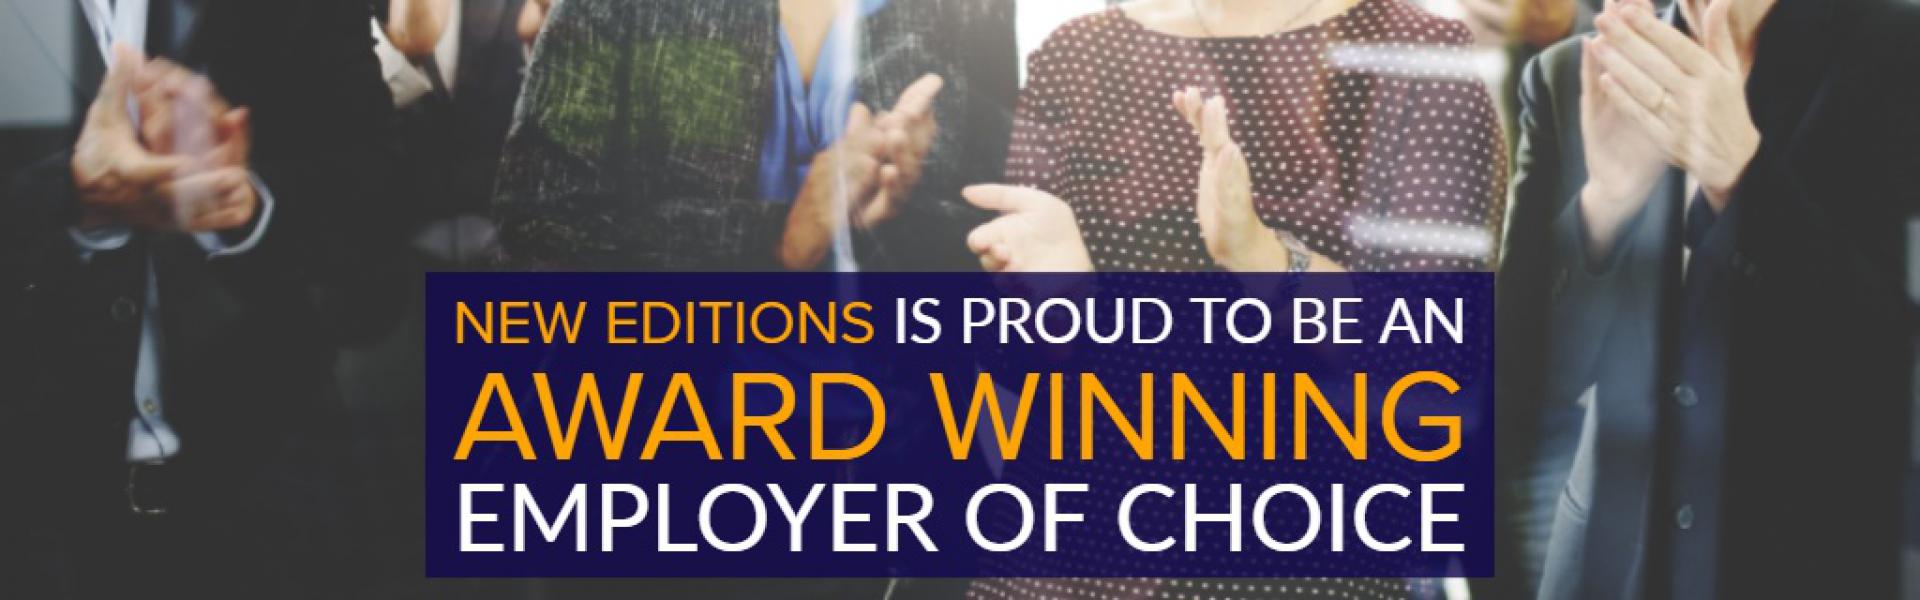 New Editions is proud to be an award-winning employer of choice.